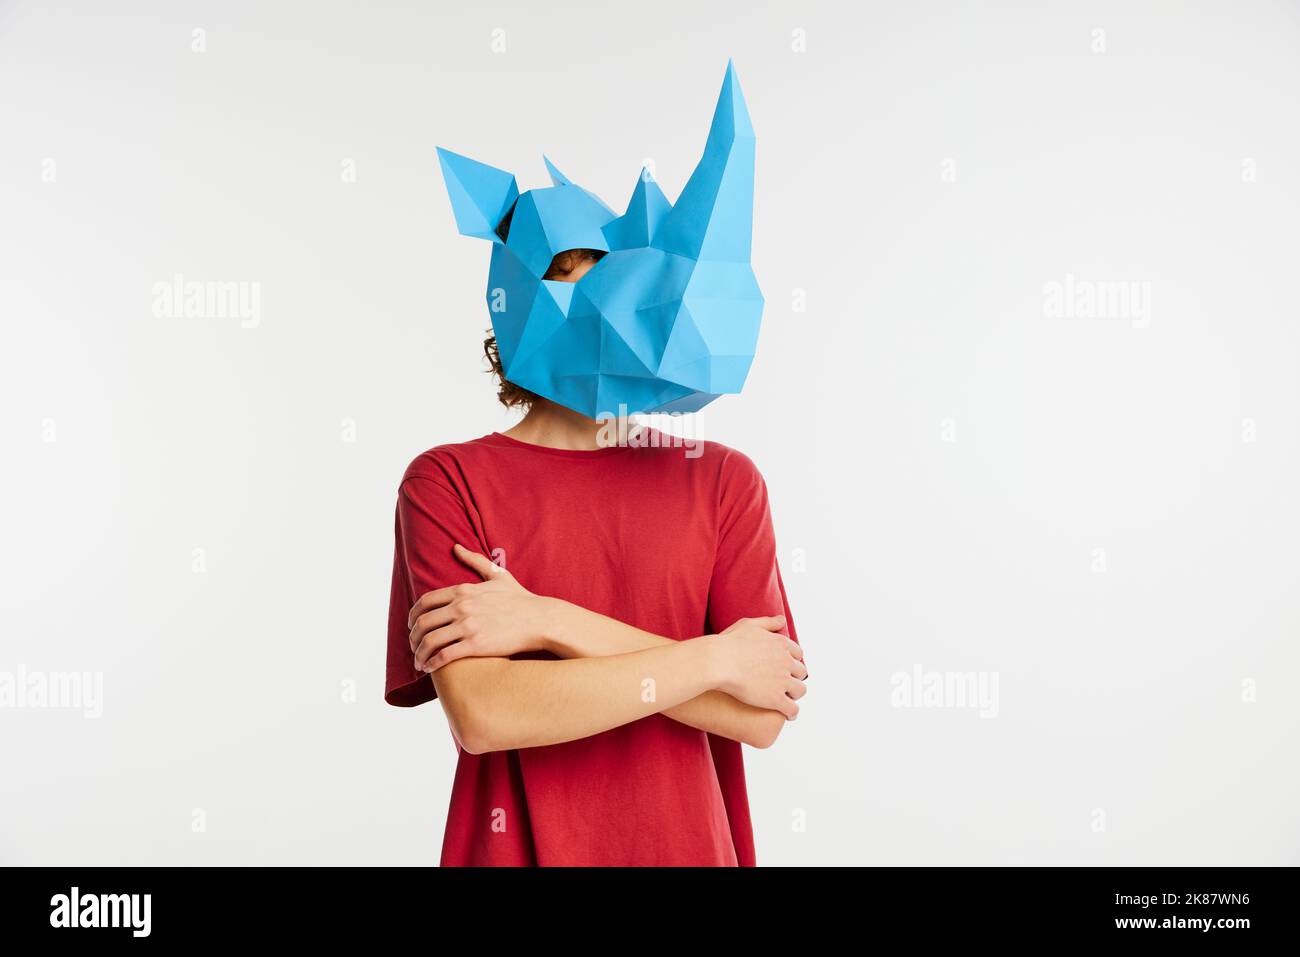 Follow your dreams with confidence. Young man in red t-shirt with cardboard animal mask on his head isolated on white background. Stock Photo